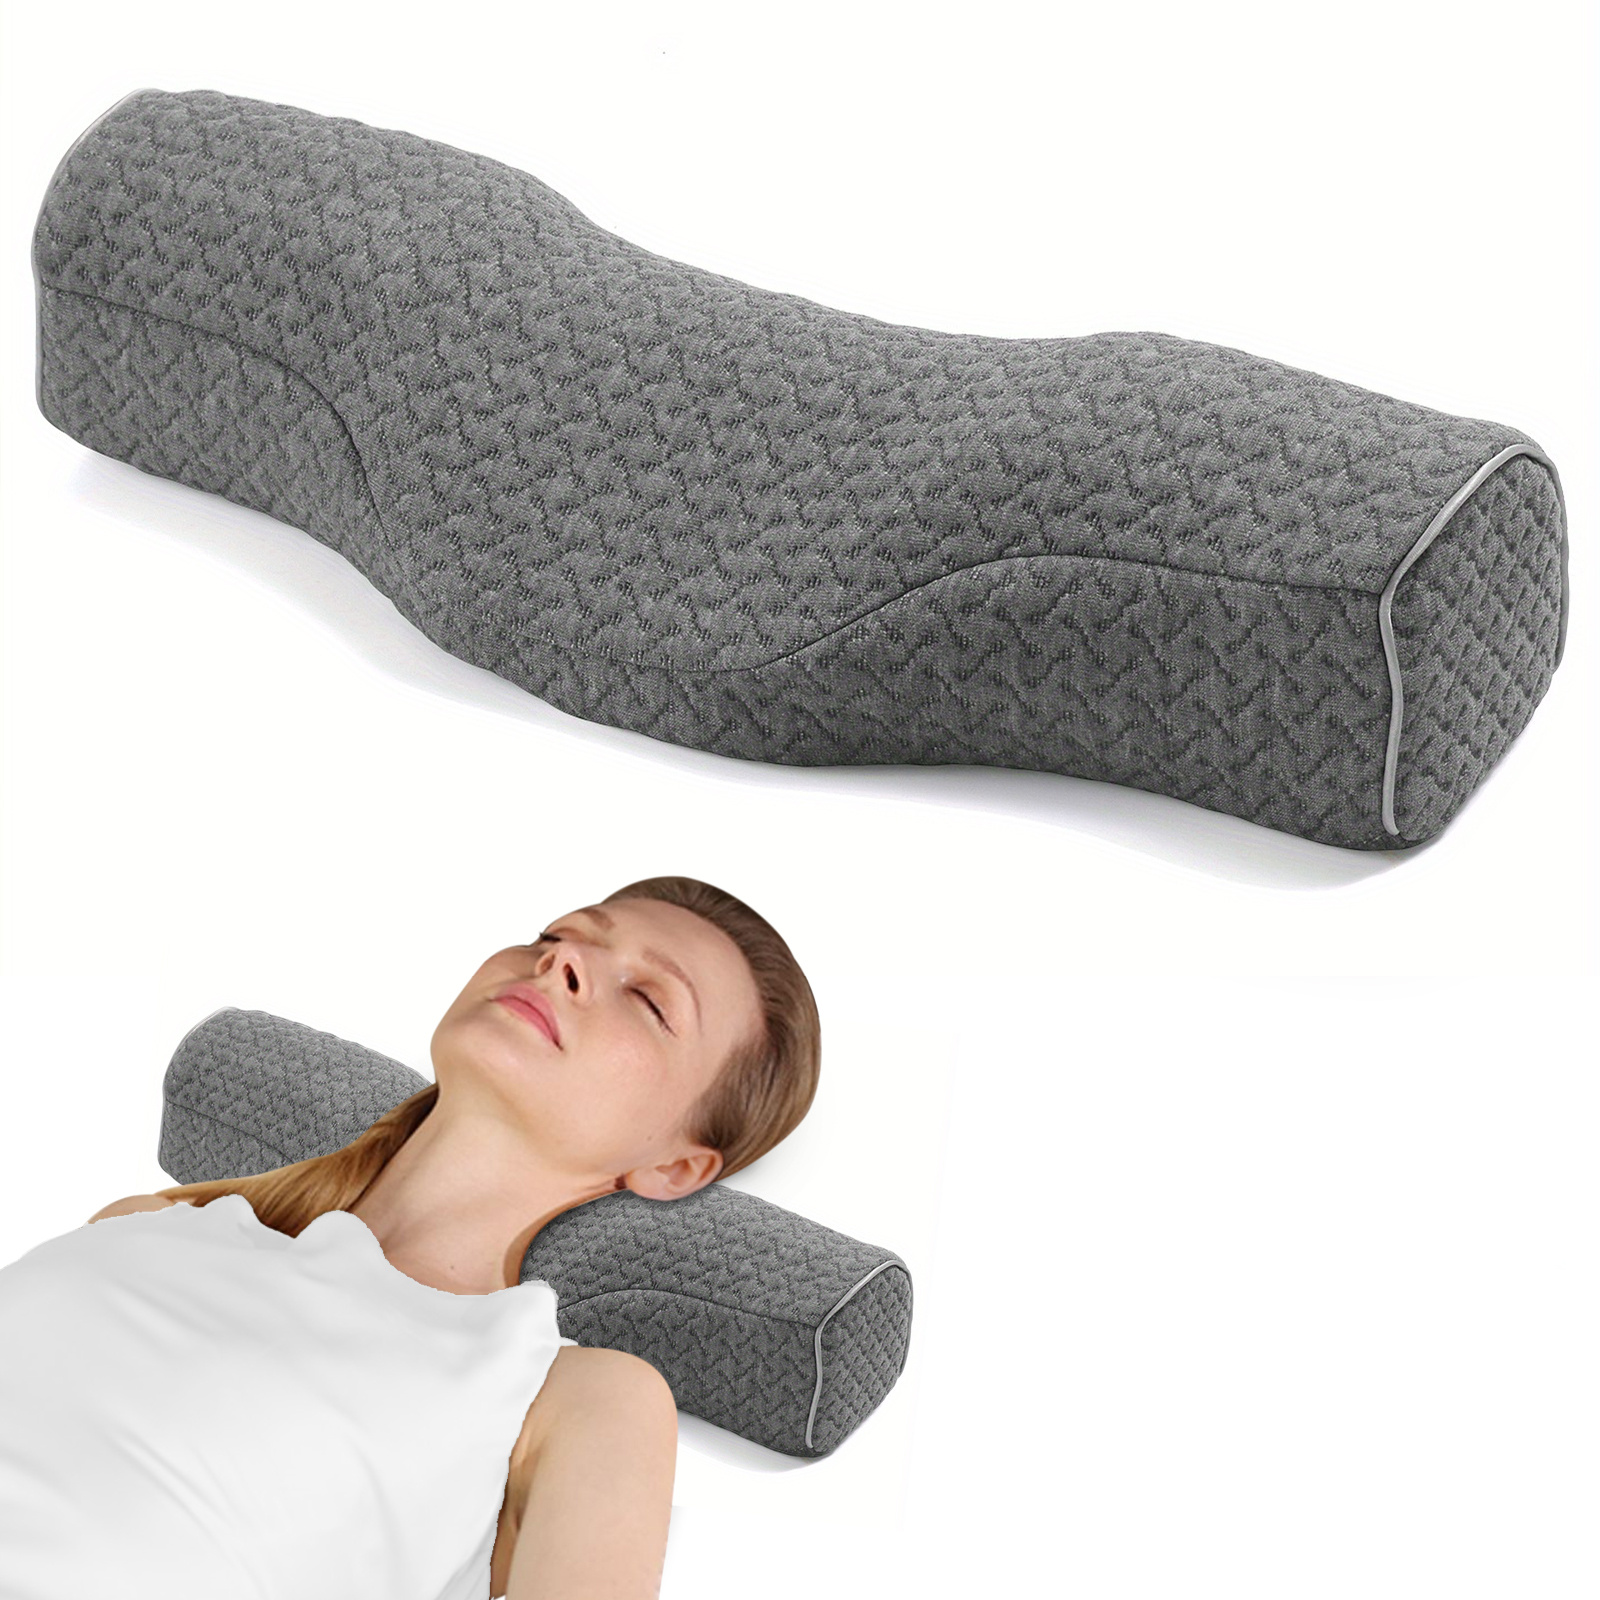 1pc Cervical Neck Pillow For Sleeping, Ergonomic Design Meets Requirement  Of Various Sleeping Positions, Neck Support Pillow Cervical Pillow For Pain